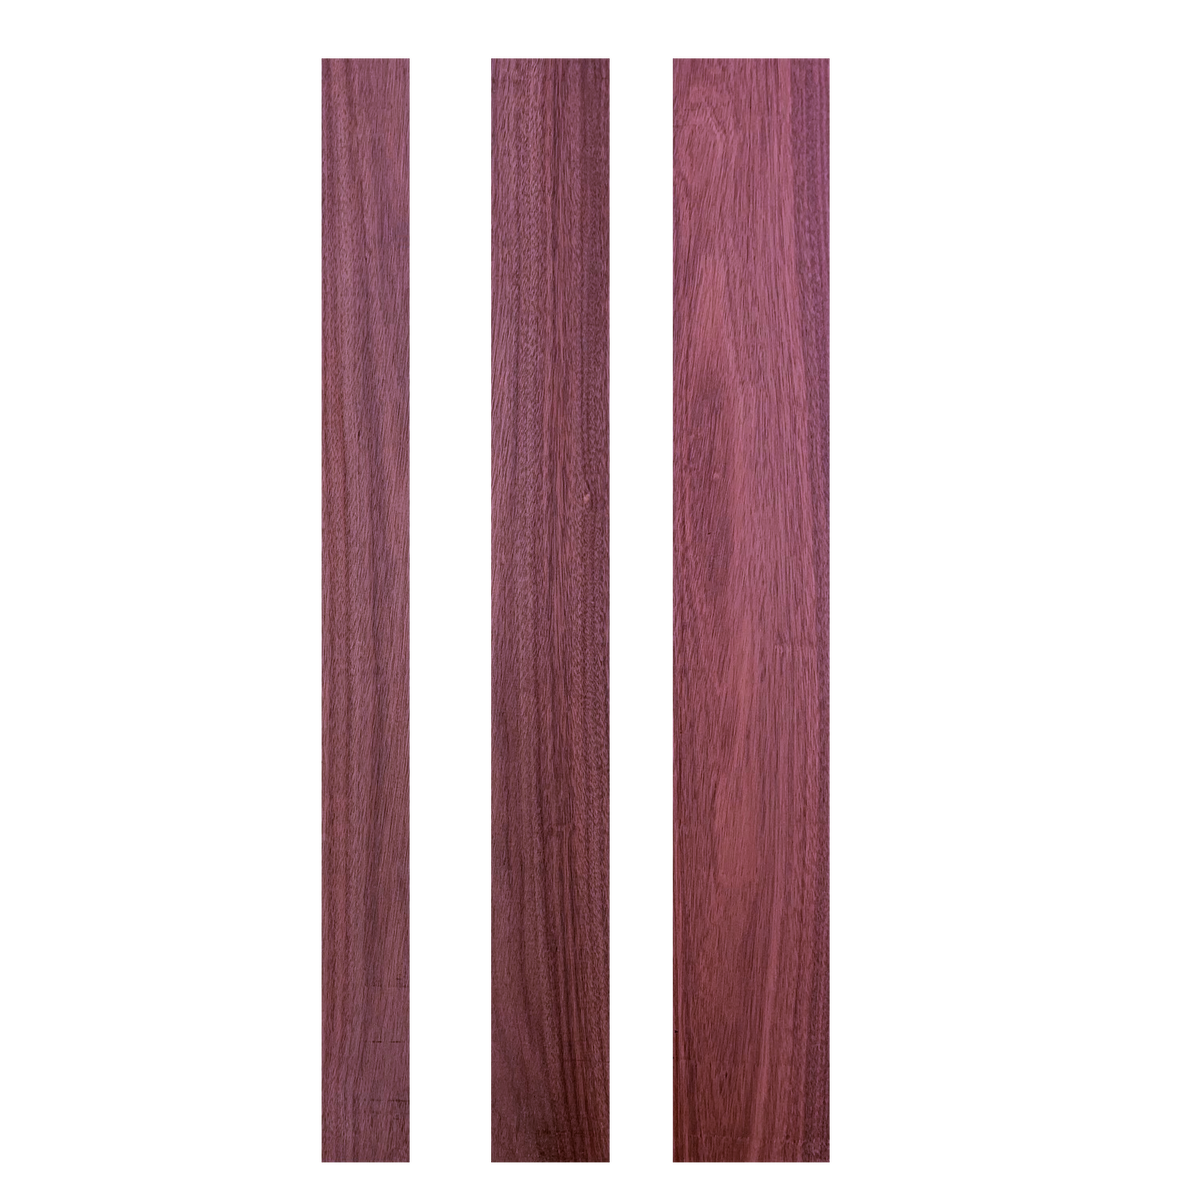 Bloodwood - Thins